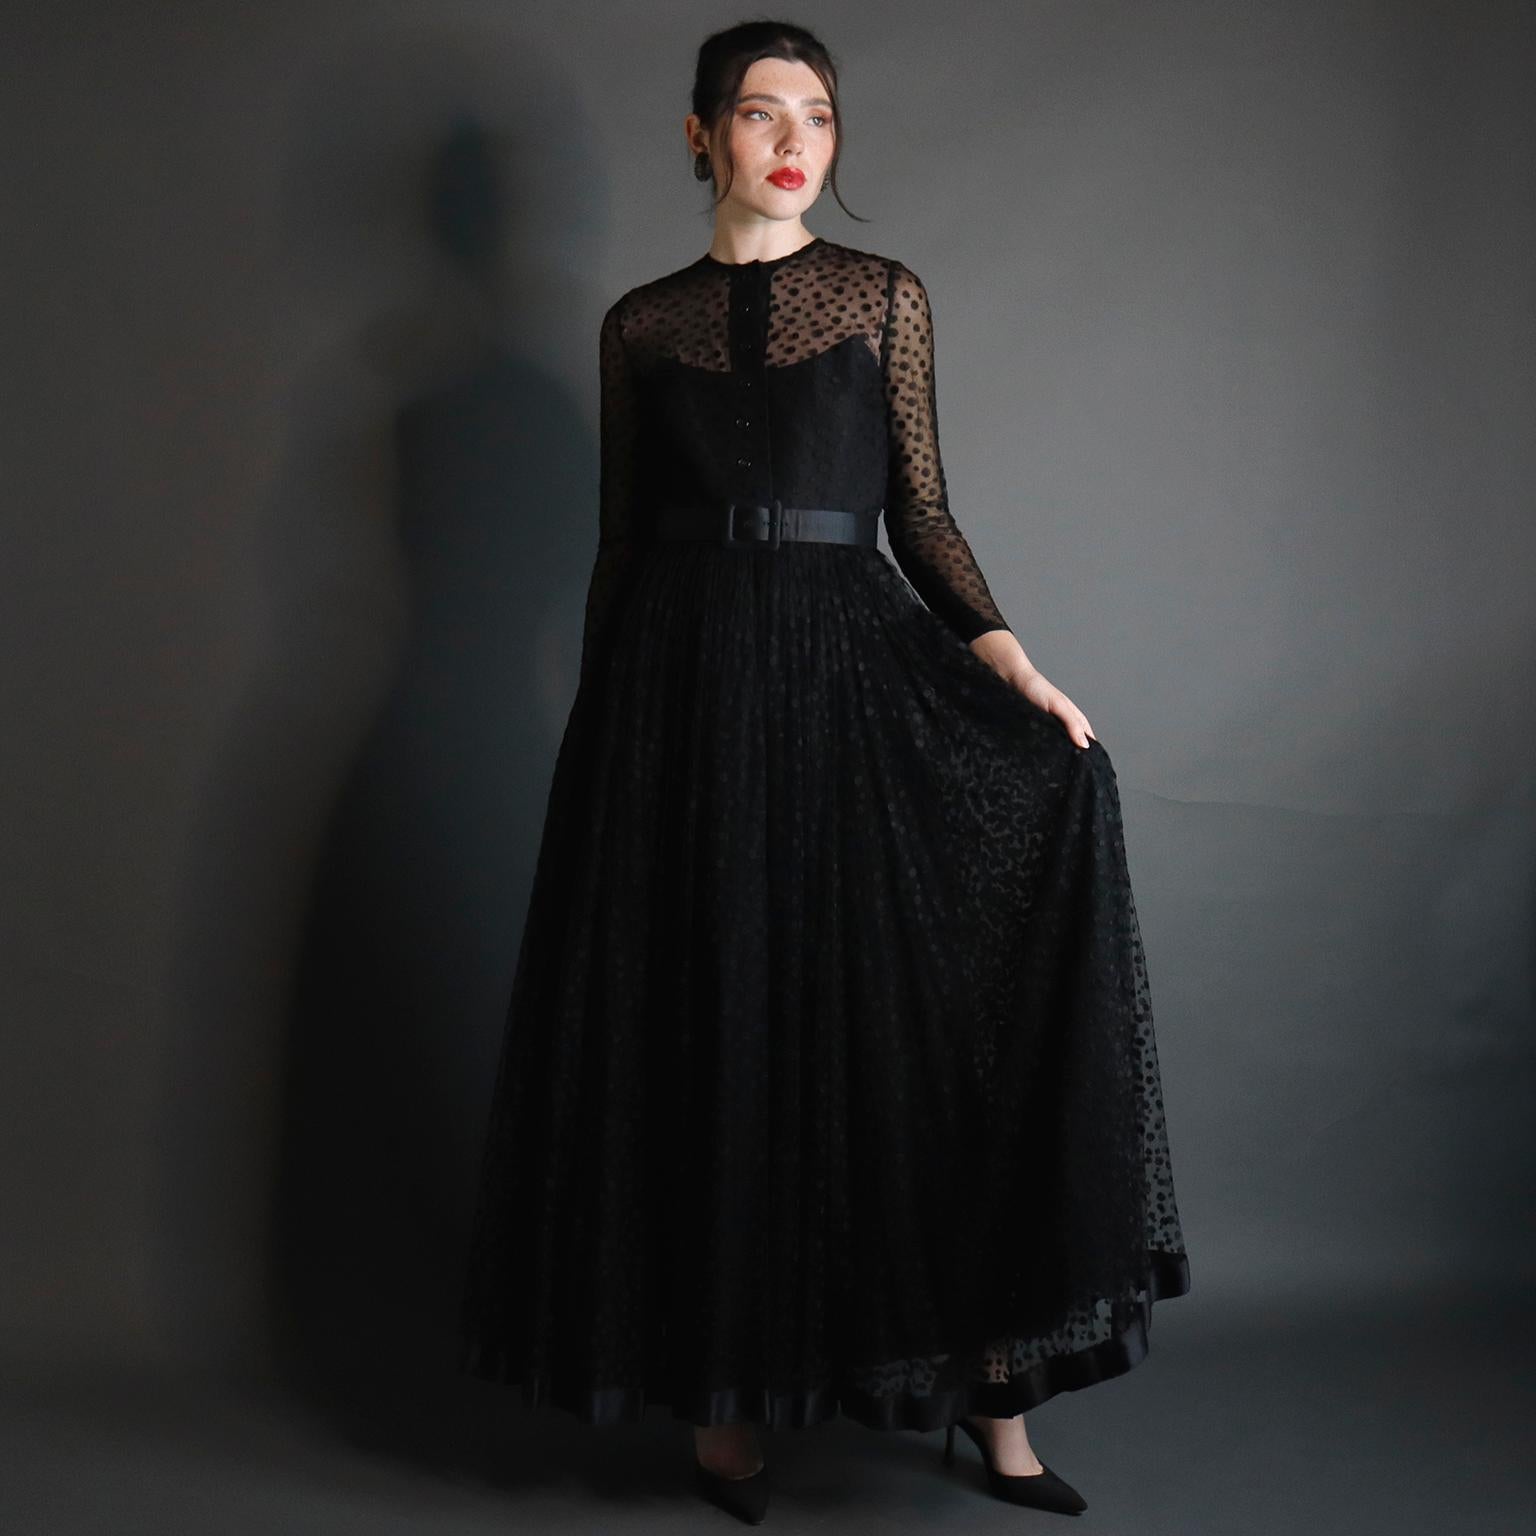 1970s Bill Blass Vintage Dress Black Silk Taffeta & Polka Dot Tulle Evening Gown In Good Condition For Sale In Portland, OR